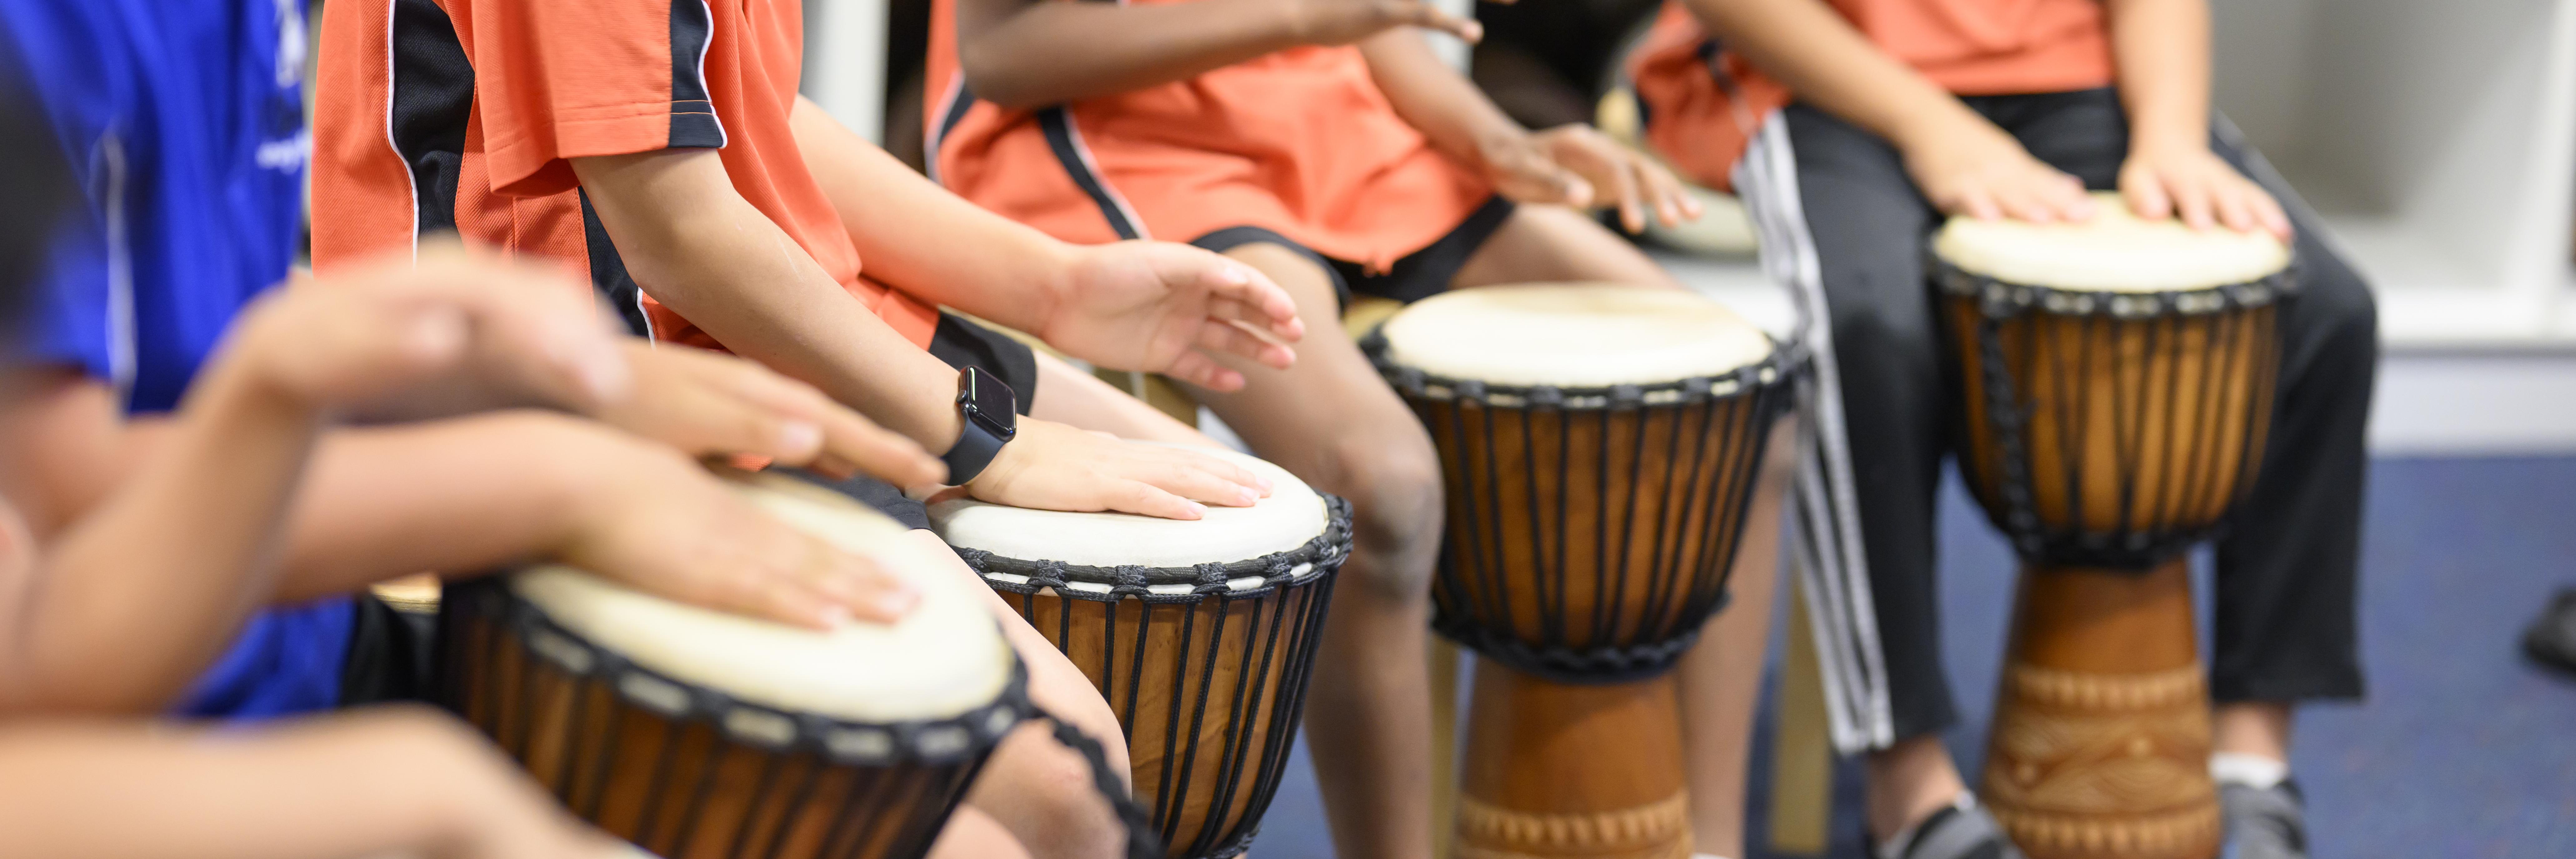 four drums in center of image, boys in motion of banging the drums with their hands. drum in main focus is being hit by a boy with a smart watch on 